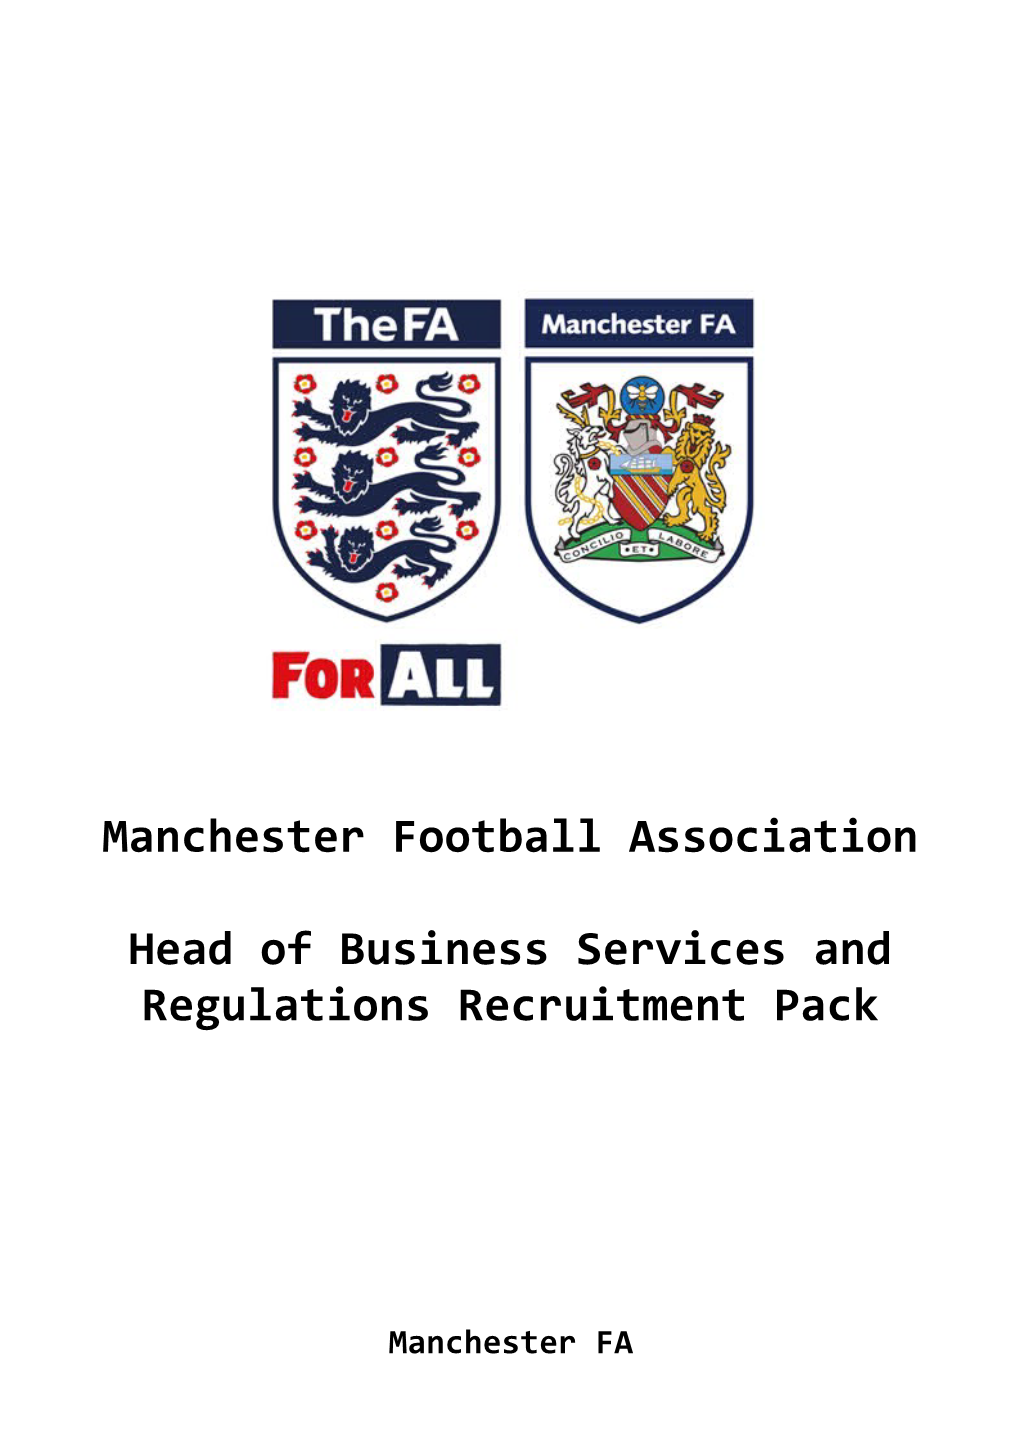 Head of Business Services and Regulations Recruitment Pack